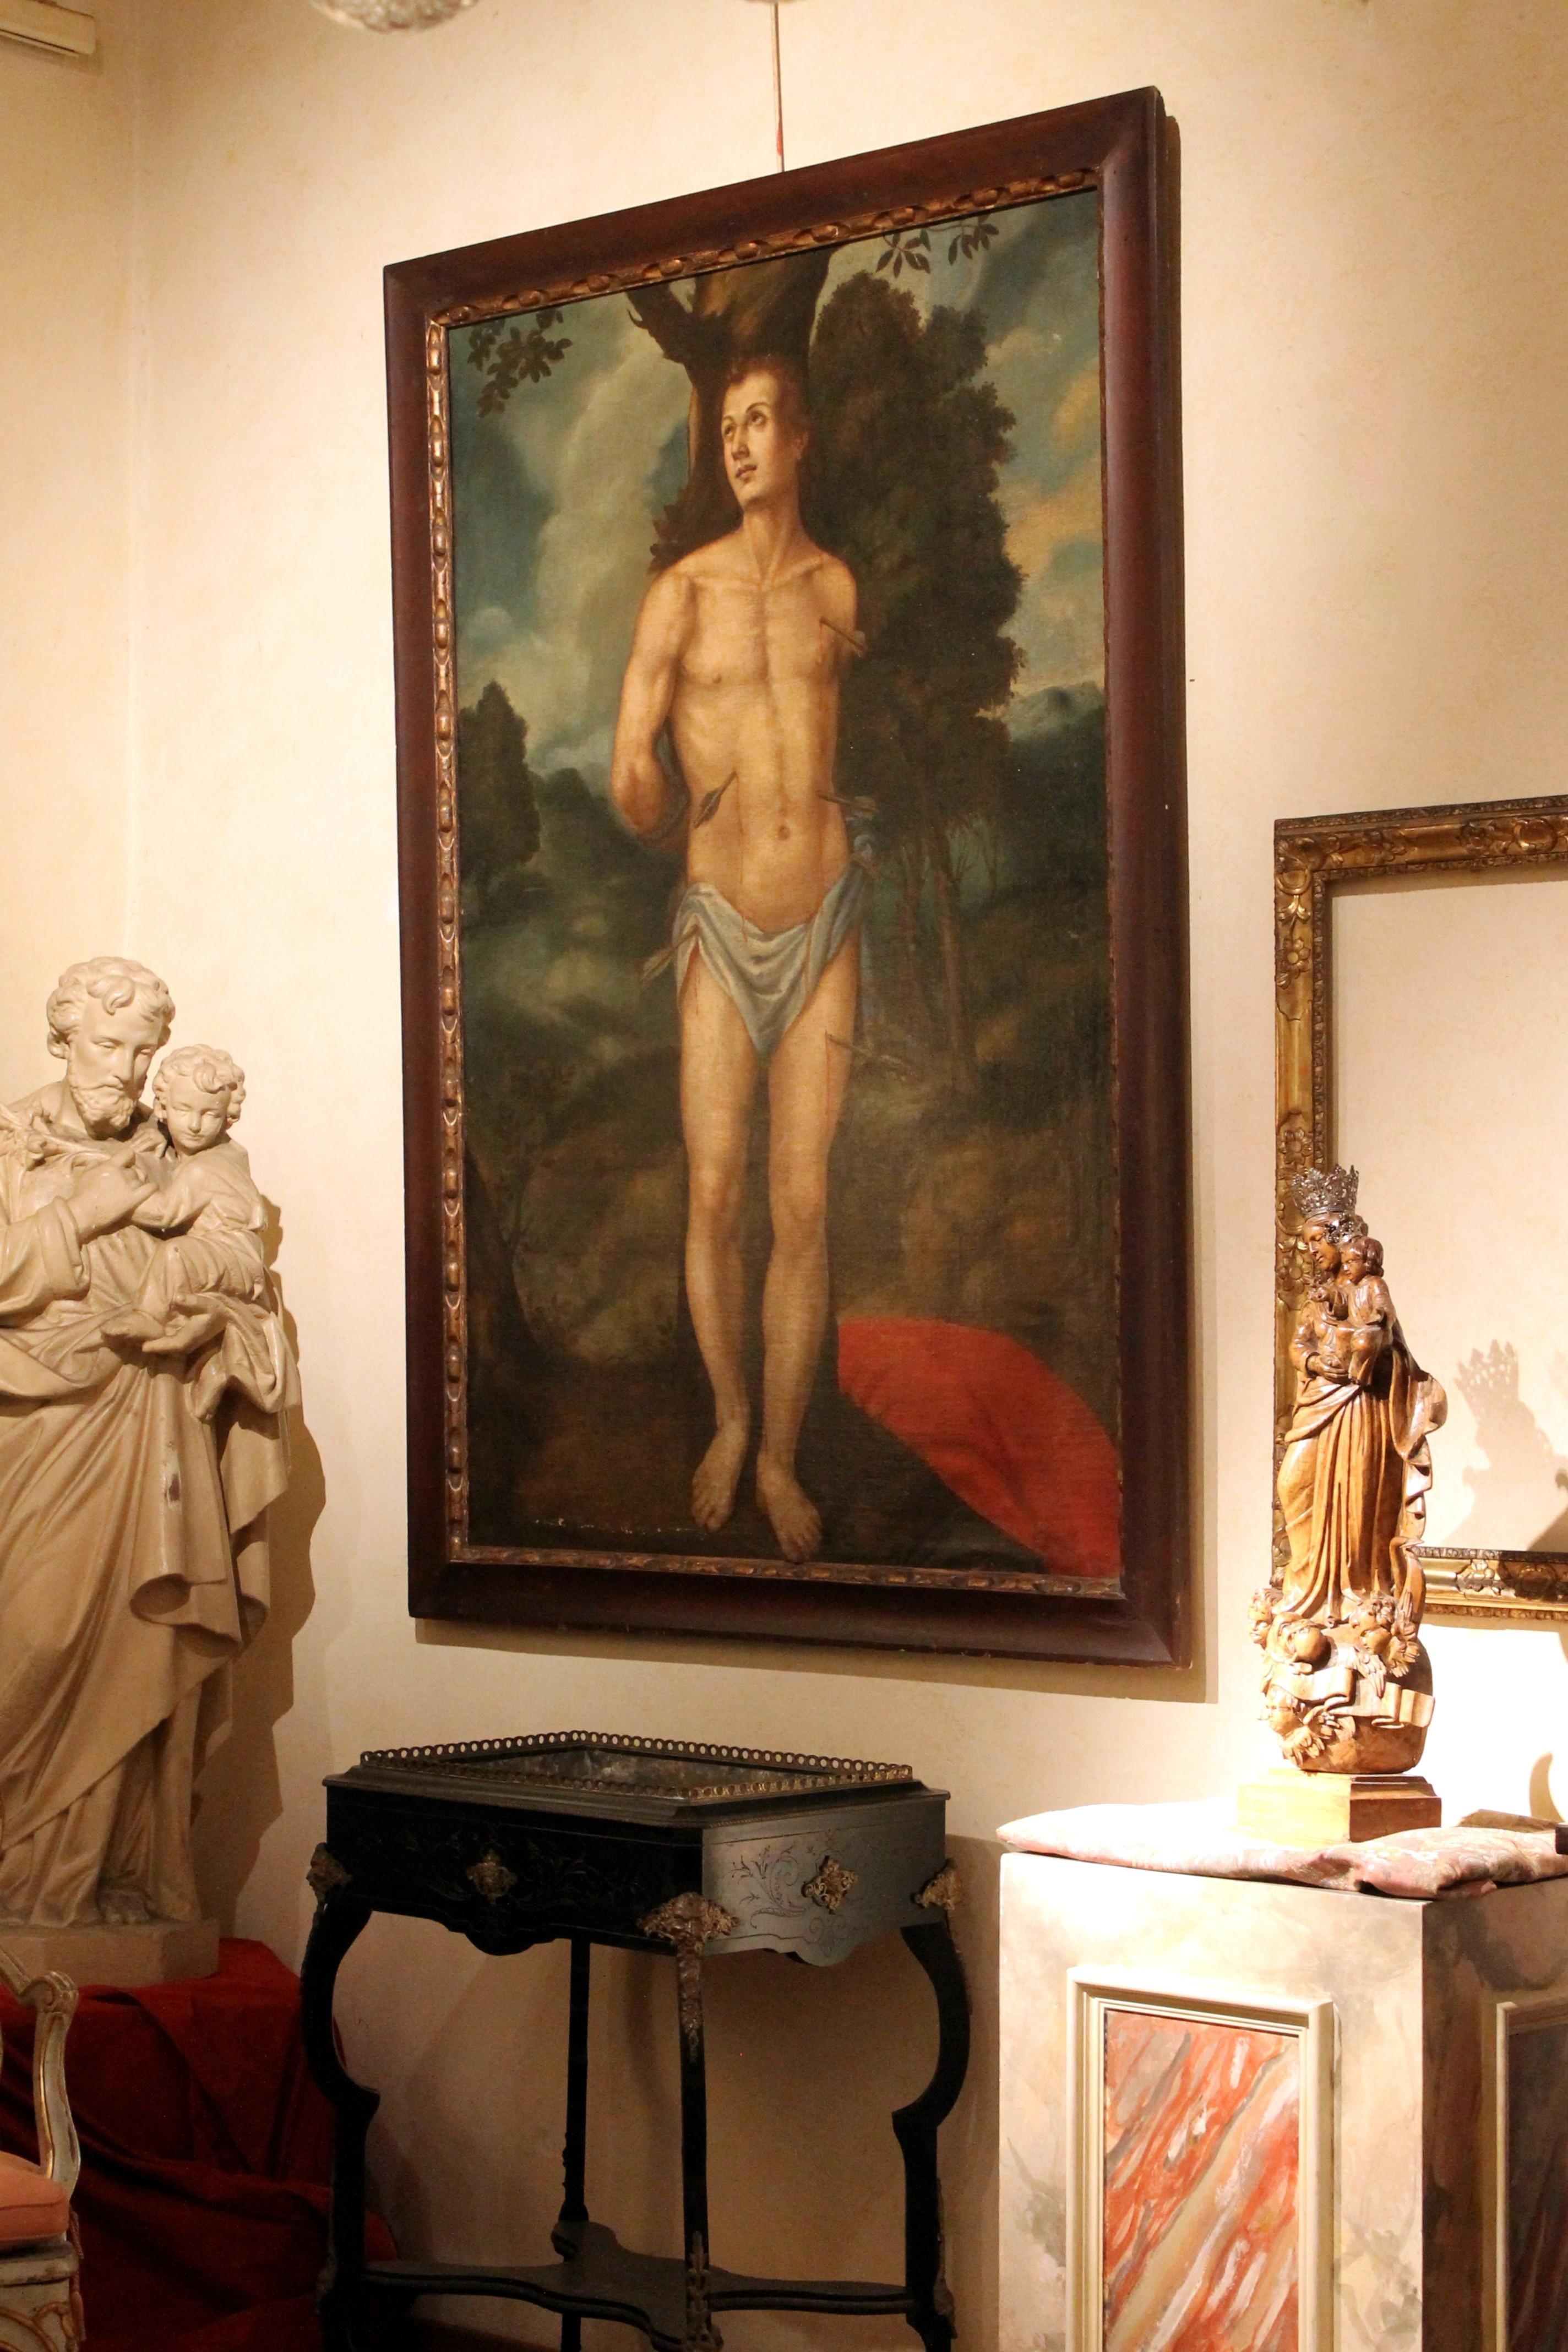 This antique Spanish School 17th century oil on canvas religious portait painting of Saint Sebastian is a symbol of rebirth and strength, so current and powerful that has become a gay icon and still contributes to redefine the perception of the